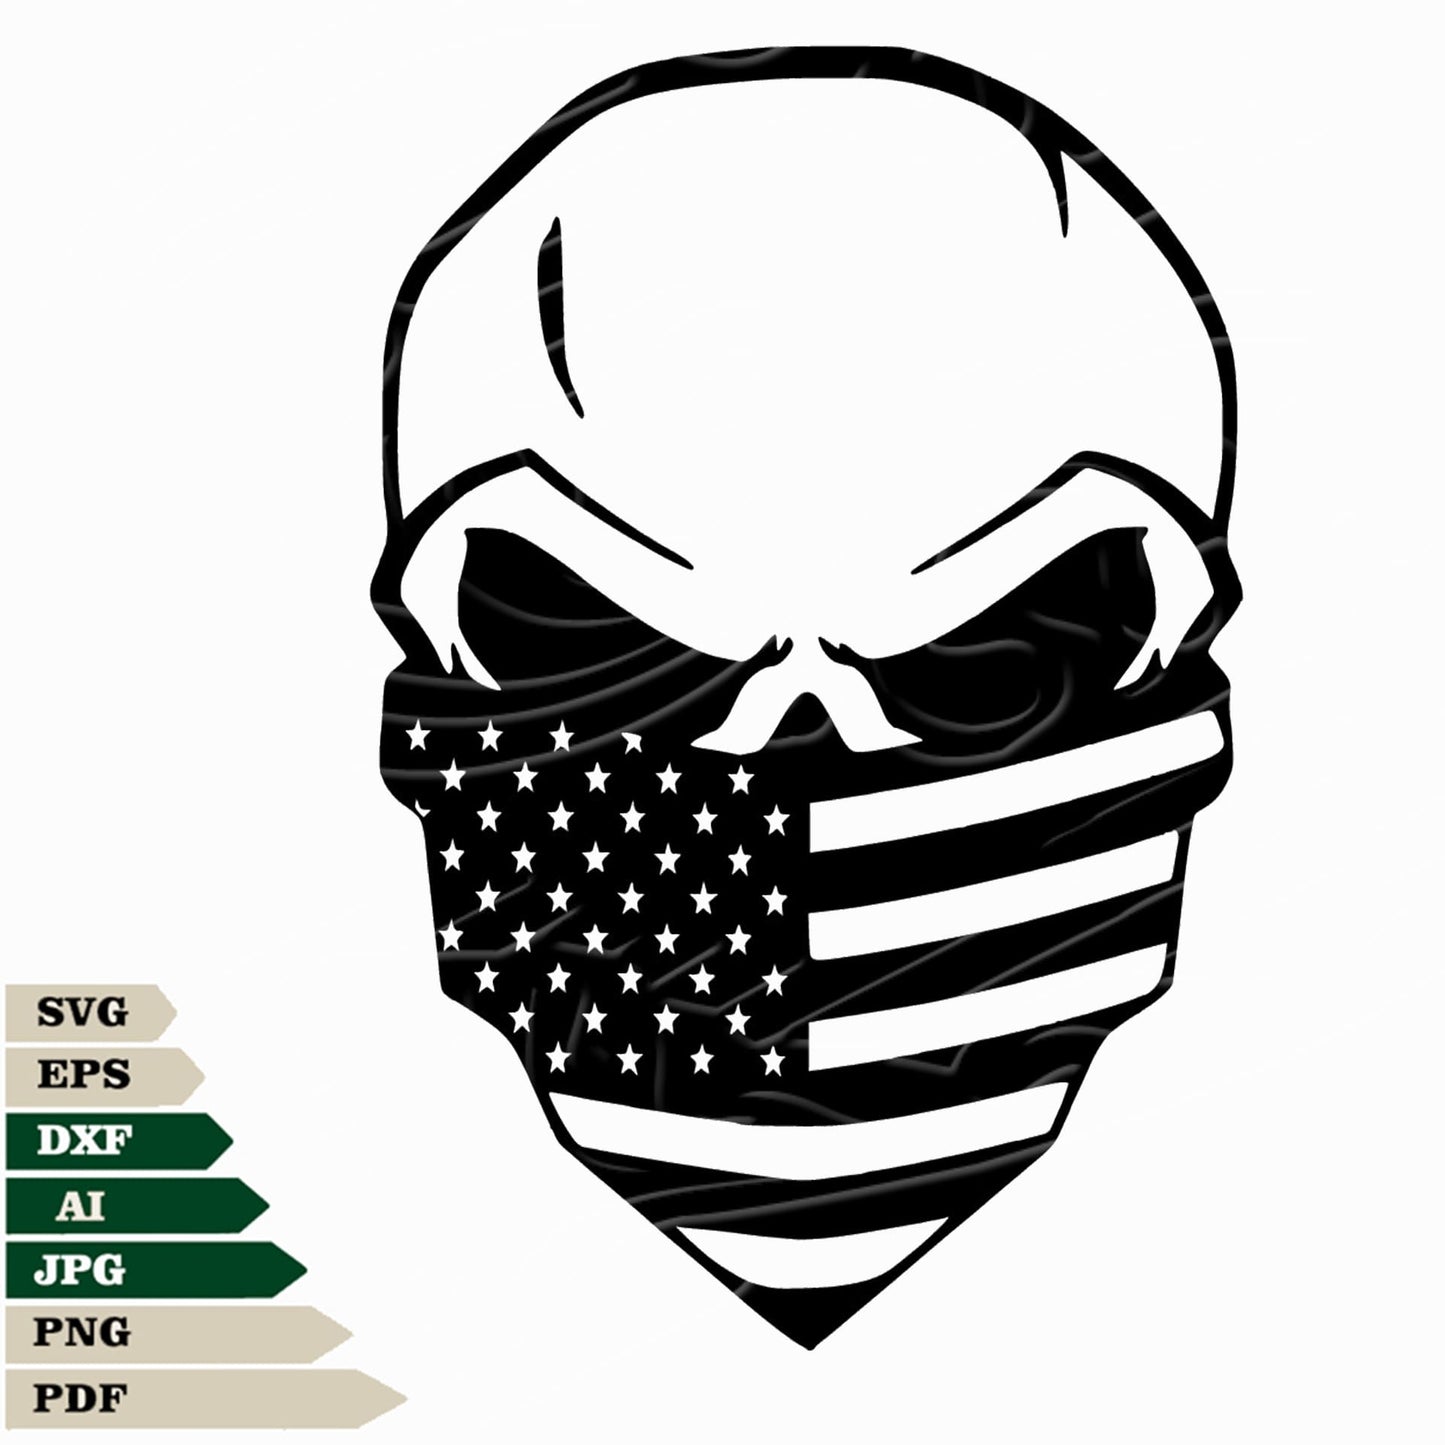 This Skull Svg File design includes a skull with an American flag mask, a skull with a bandana png, and a skull vector graphic with a bandana svg for tattoo and cricut designs. This high-quality, vector-based collection is perfect for creating unique and detailed works of art.